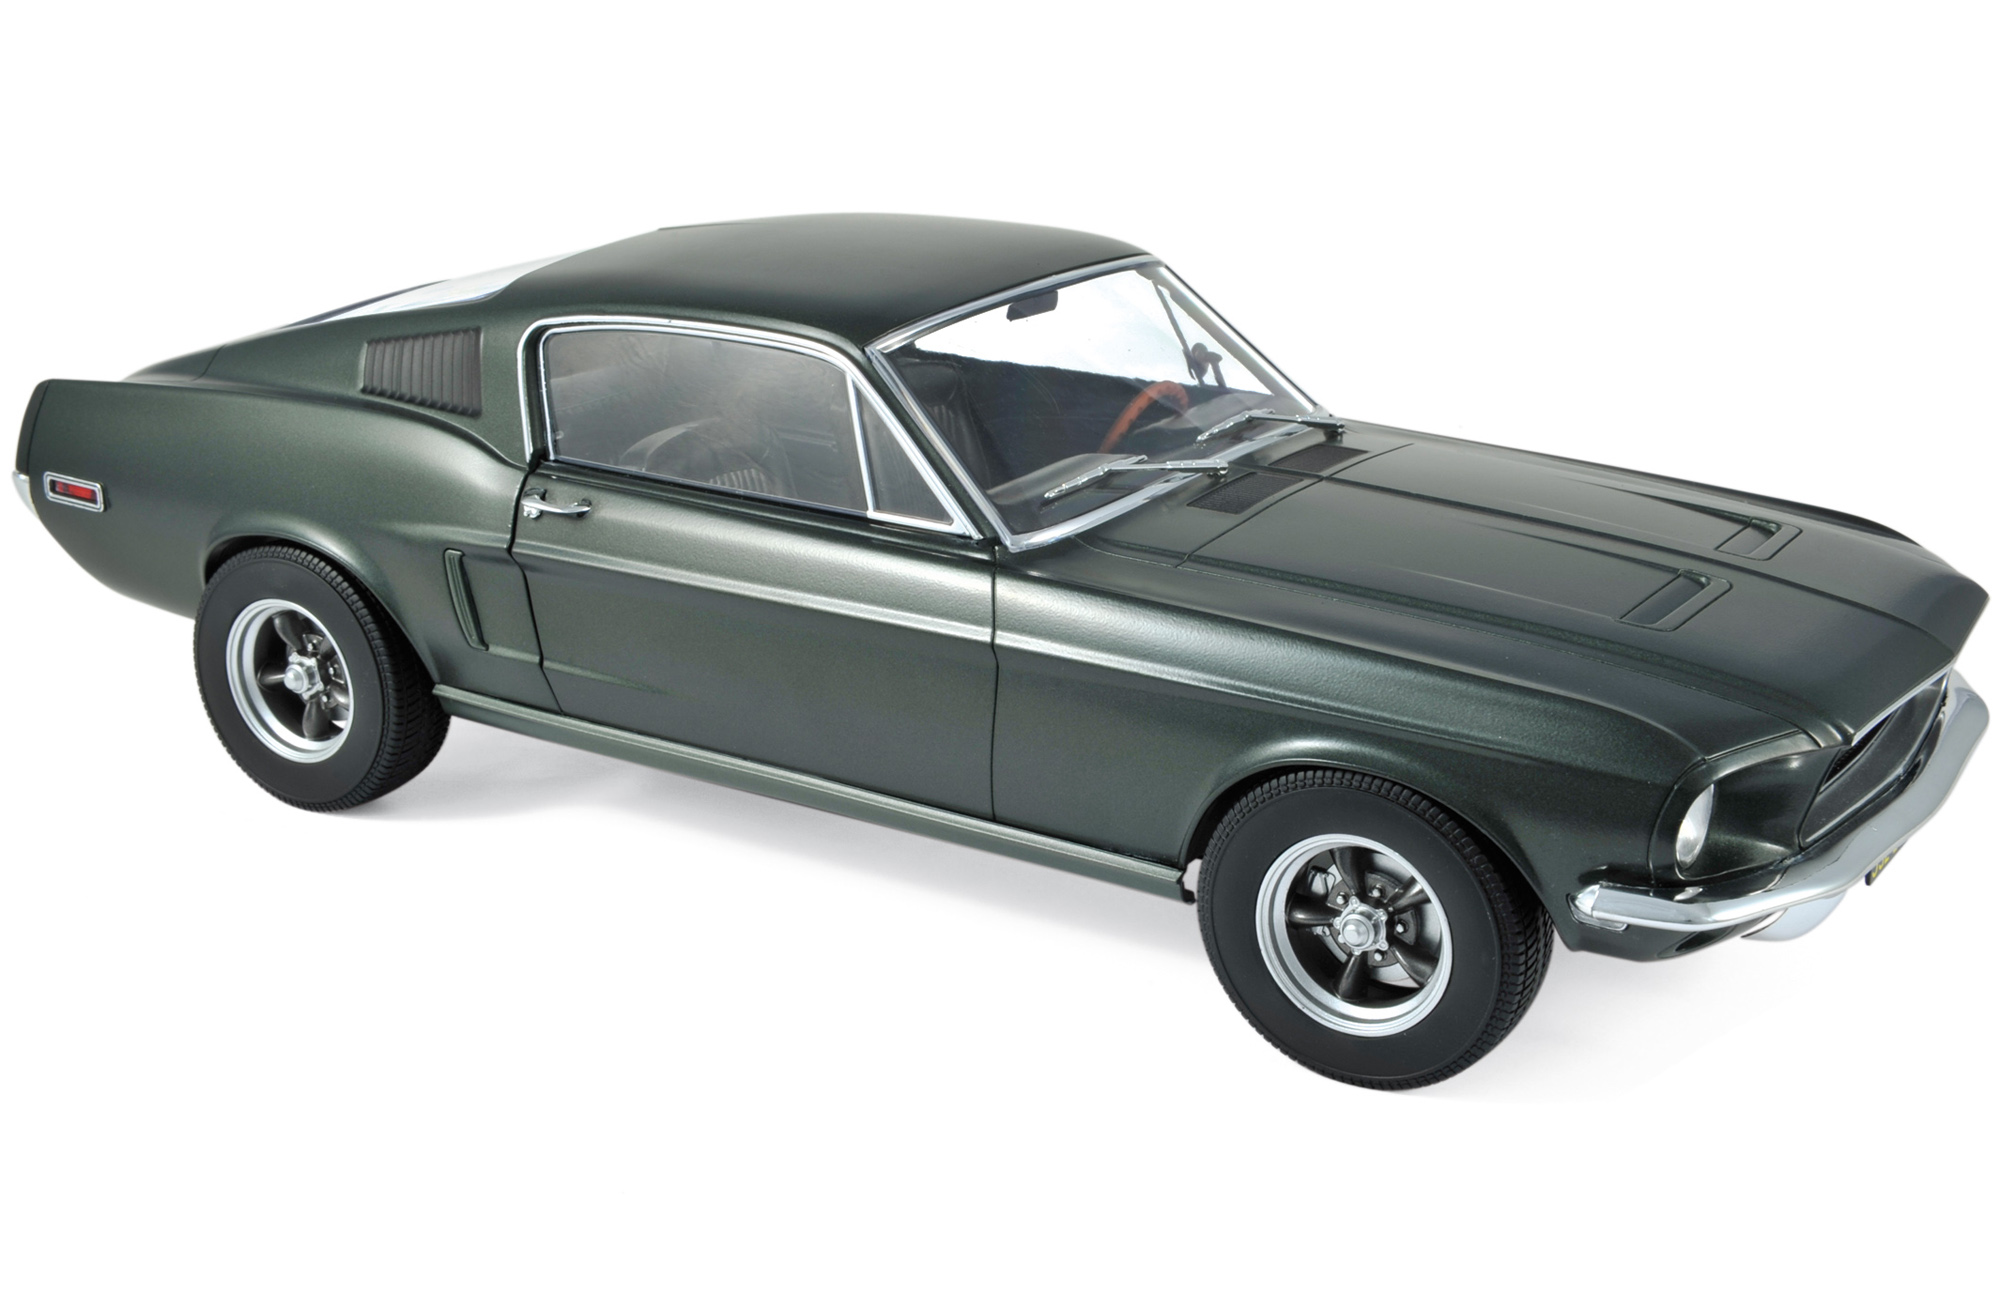 1968 Ford Mustang Fastback Satin Green Metallic 1/12 Diecast Model Car By Norev